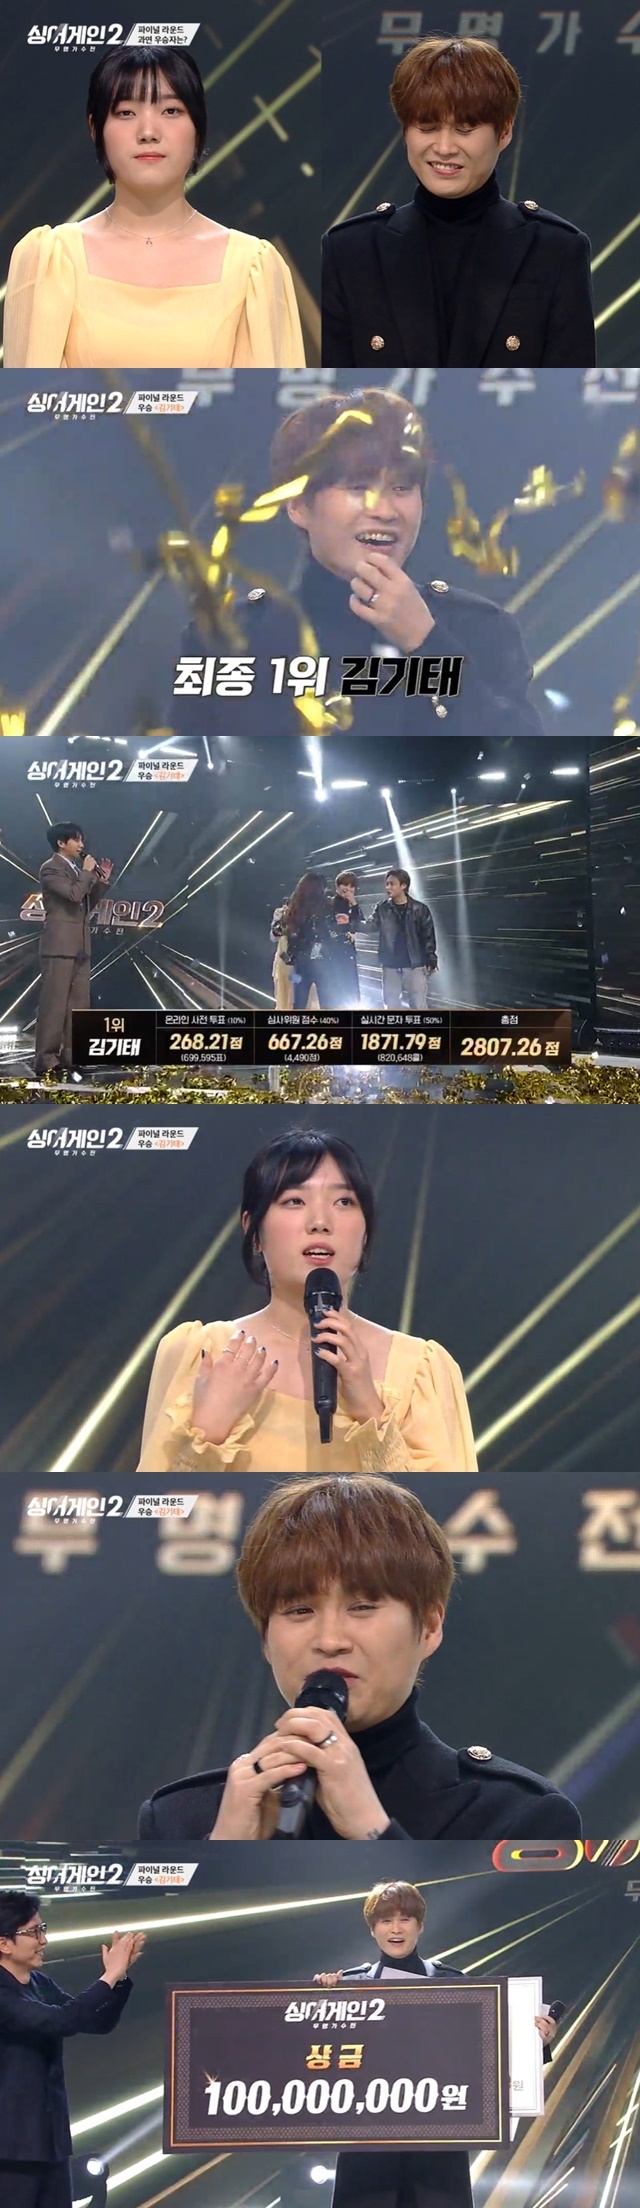 The 33rd singer Kim Ki-tai took the final place.The final round was held at the JTBC entertainment program Sing Again 2 Unknown Singer Exhibition, which was broadcast on February 28th.TOP6 No. 7 Kim So-yeon, No. 33 Kim Ki-tai, No. 73 Lee Joo-hyuk, No. 31 Shin Yumi, No. 37 Park Hyun Kyu, No. 17 Yoon Sung came to the final stage.TOP3 is a massage chair and activity subsidy of 30 million won, and the final Competitive Dance method, which can receive 100 million won prize money, is a total of 10% online pre-voting, 40% judging panel score, and 50% real-time text voting.Real-time character voting numbers are soon in the order of Competitive dance.Kim So-yeon, Kim Ki-tai, Lee Joo-hyuk, No. 4, Shin Yumi, Park Hyun Kyu, No. 5, and Yoon Sung No. 6 played the final stage.First, Kim So-yeon released a video with the band members, and after passing the additional pass, he showed the premiere of the Mental Gab image, saying, It seems that I can enjoy it by pretending that I am not shaking anymore.Kim So-yeon performed the stage People Are Changing in spring, summer, autumn and winter, and received a total of 751 judges scores.Kim Ki-tai released a video of his fathers visit to the shrine with his wife and child, and he regretted the fact that his father, who was the only supporter of music, wanted to see my stage once before his death, but he would show it on a better stage.Kim Ki-tai was enthusiastic about the holistic human rights after love and received a total of 749 judges scores.Lee Joo-hyuk, number 3, has released a video from his visit to his hometown Geoje Island.Lee Joo-hyuks mother upgraded the banner and showed her sons love, and even though she was tearful at the thought of her struggling son, she mentioned TOP3 injury, saying, It is not more real than screen.Lee Joo-hyuk received a total of 746 judges scores on the stage of the new and chief Thorn Tree.Shin Yu-mi, No. 4, was cheered by choreographers Bae Yoon-jung, Choi Young-joon and uptension Lee Jin-hyuk, who had a relationship with the audition broadcast of Produce 101.They admired Shin Yumi, saying, I was so good, and Lee Jin-hyuk presented herbs and hand cream for healing.Shin Yu-mi performed a passionate stage by selecting Lee Sun-hees Beautiful Gangsan and received a score of 738 for the judges.Park Hyun Kyu, number 5, was supported by Mamamu Solar and Moonbyeol; Park Hyun Kyu was associated with Mamamu for more than a decade since she was a trainee.Sola said, I have a lot of things to learn and I do not rest and I work too hard. Hwasa cheered Park Hyun Kyu, saying, I am the number one in my mind in video calls.Park Hyun Kyu selected Kim Bum-soo Getting Through and received the highest score with a total of 757 judges.I knew I was going to be mad, the band Africans said in their final appearance on the sixth, and I was recognized from the past. I didnt have a chance to tell many people.Again is like a lottery ticket in my life, like a collection of all good fortunes, Yoon said, I met him on the brink of quitting music.Yoon Sung exploded with a high-pitched candle in front of you, and received a score of 749.Season 1 TOP3 Lee Seung-yoon, Jung Hong-il, Lee Moo-jin and Season 2 TOP6 together until the audience voting deadline.Lee Moo-jin, Kim So-yeon, and Lee Jin-hyuk joined together to set the chord with a light. Jeong Hong-il, Kim Ki-tai, and Yoon Sung burst into a high-pitched harmony with Ya.Lee Seung-yoon, Shin Yu-mi and Park Hyun Kyu erupted a lot of excitement and excitement with collecting scattered dreams.The judges scored first place Park Hyun Kyu, second place Kim So-yeon, third place Kim Ki-tai Yoon Sung, fifth place Lee Joo-hyuk, sixth place Shin Yumi.Here, the online pre-vote and the viewers vote were added up, and the final ranking was reversed.The final rankings were 6th place Shin Yumi, 5th place Lee Joo-hyuk, 4th place Park Hyun Kyu, 3rd place Yoon Sung, 2nd place Kim So-yeon, 1st place Kim Ki-tai.I never imagined I would be here, but Im so excited to have a better result than I thought, said Mental Kim So-yeon, who finished second in the series with additional passes and losers resurgence.I will continue to work in the future without forgetting the overwhelming impression I feel now while working on music.